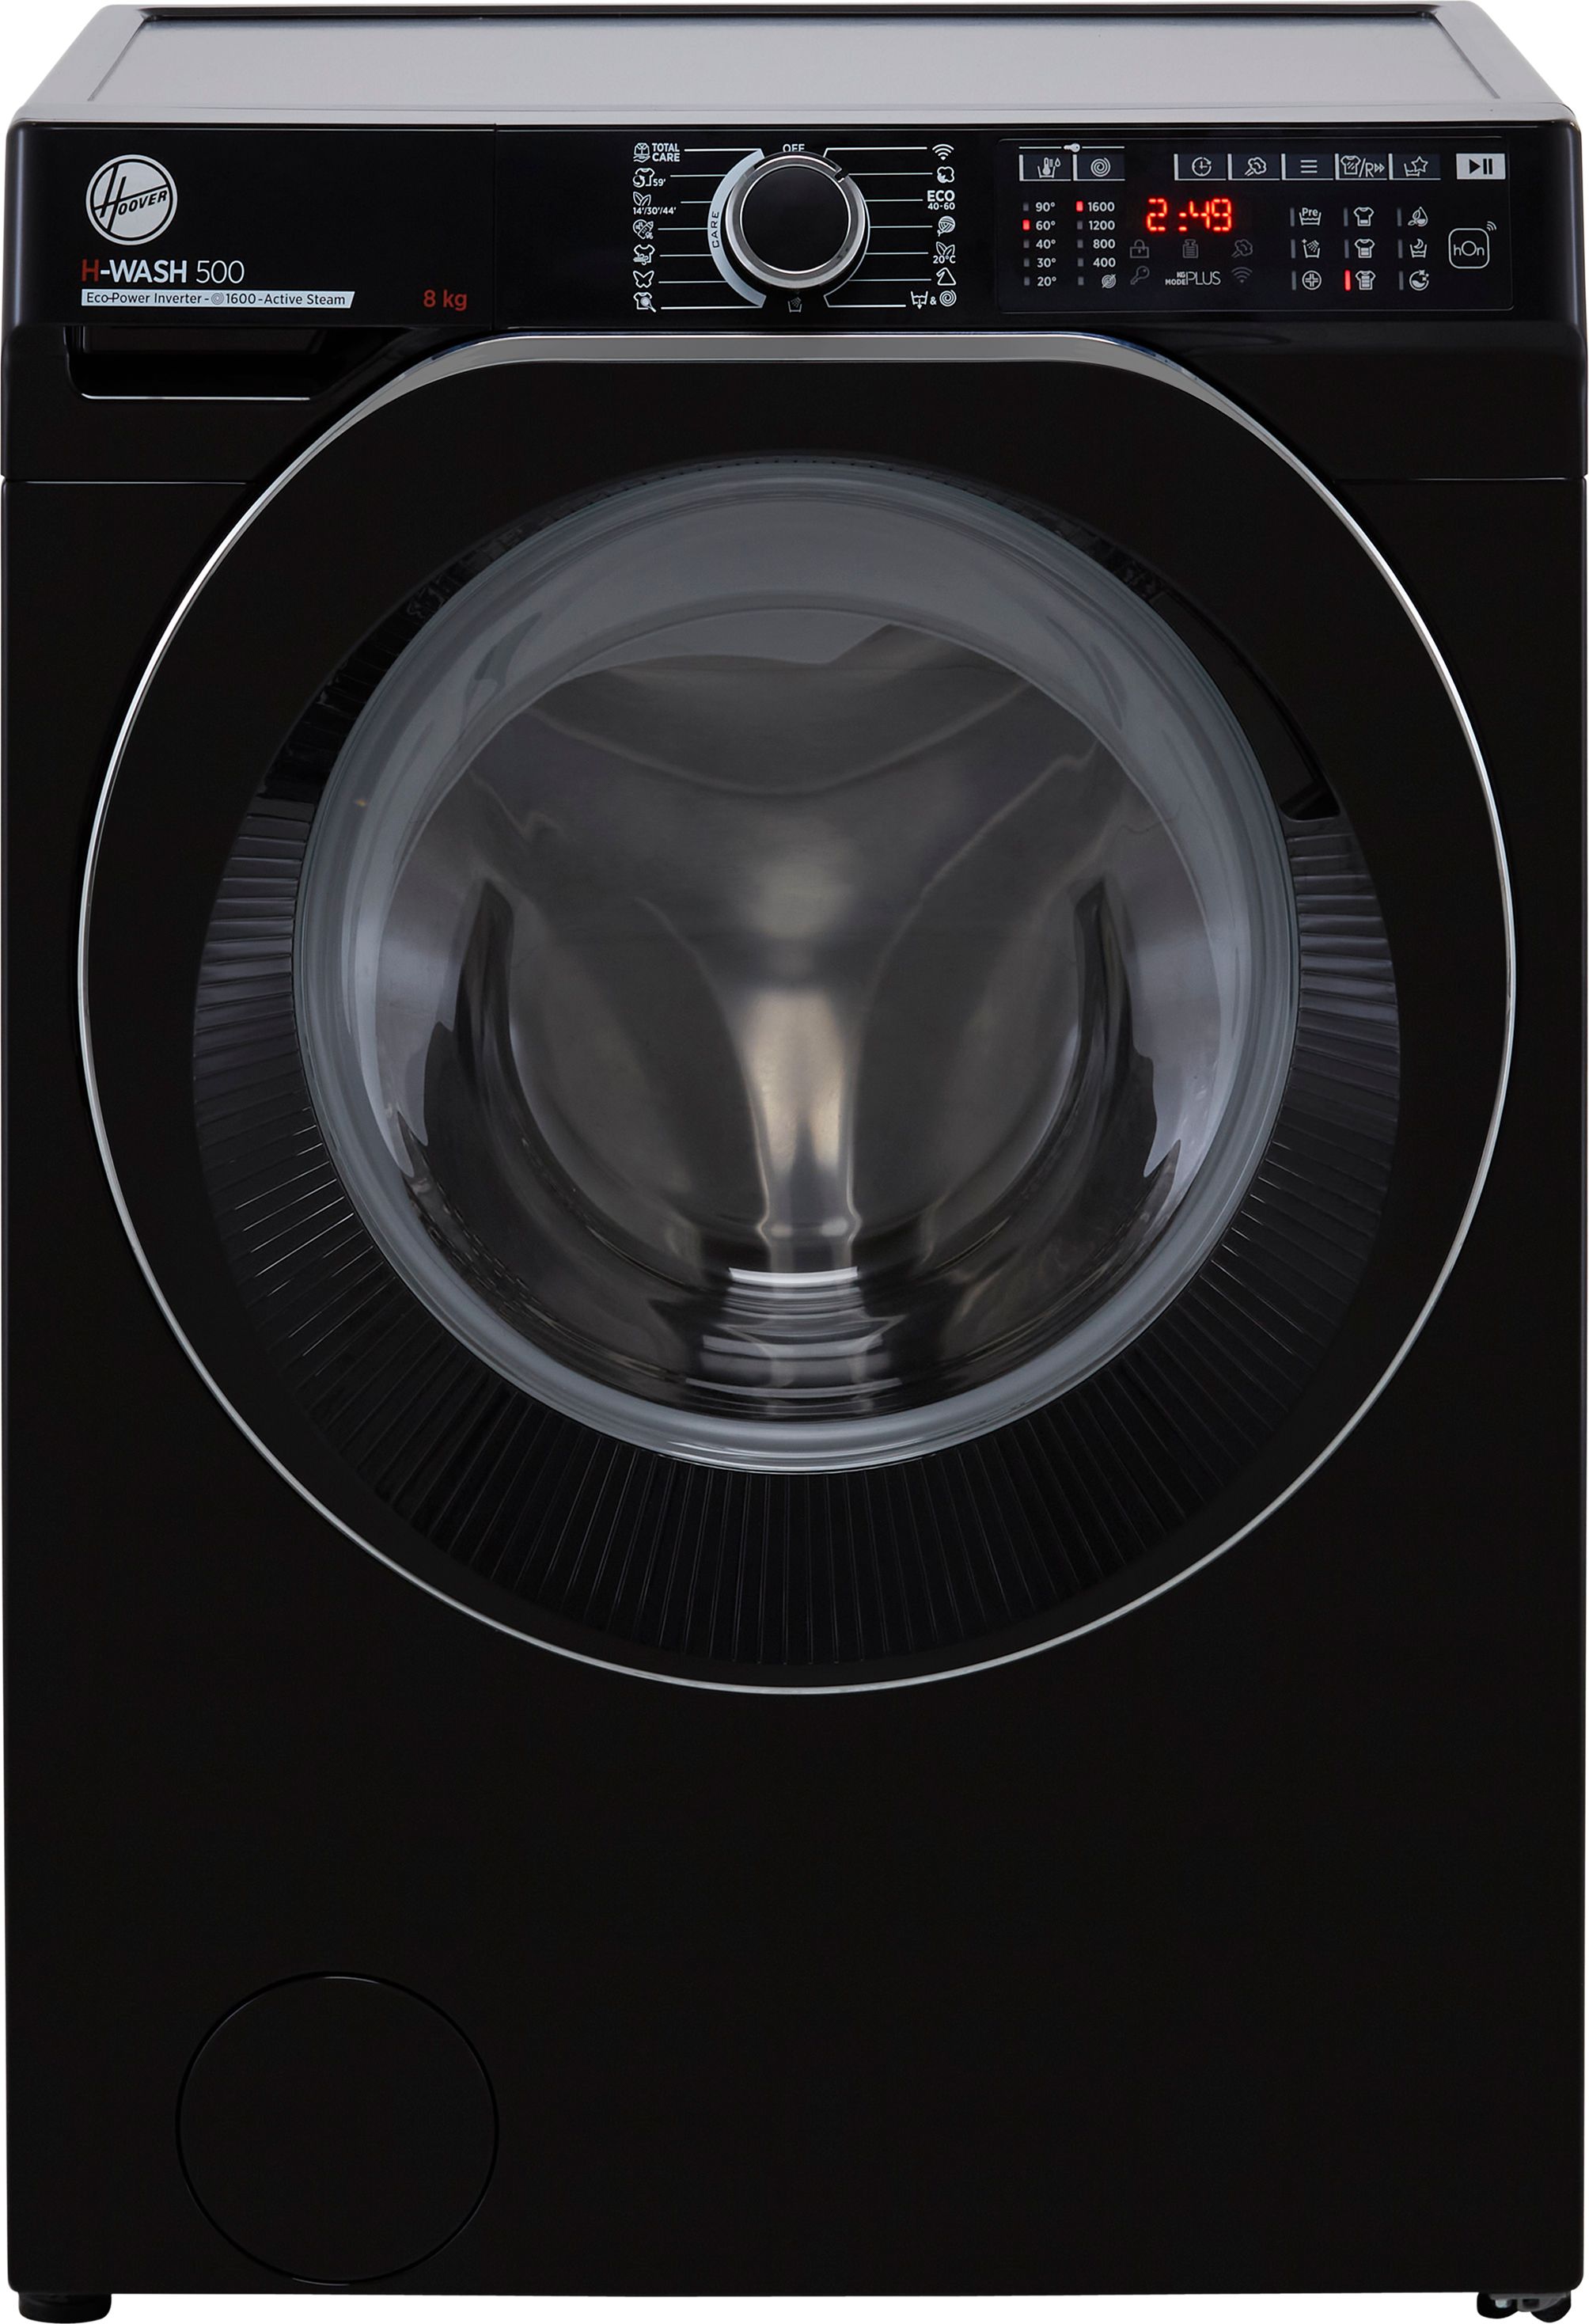 Hoover H-WASH 500 HW68AMBCB/1 8kg Washing Machine with 1600 rpm - Black - A Rated, Black